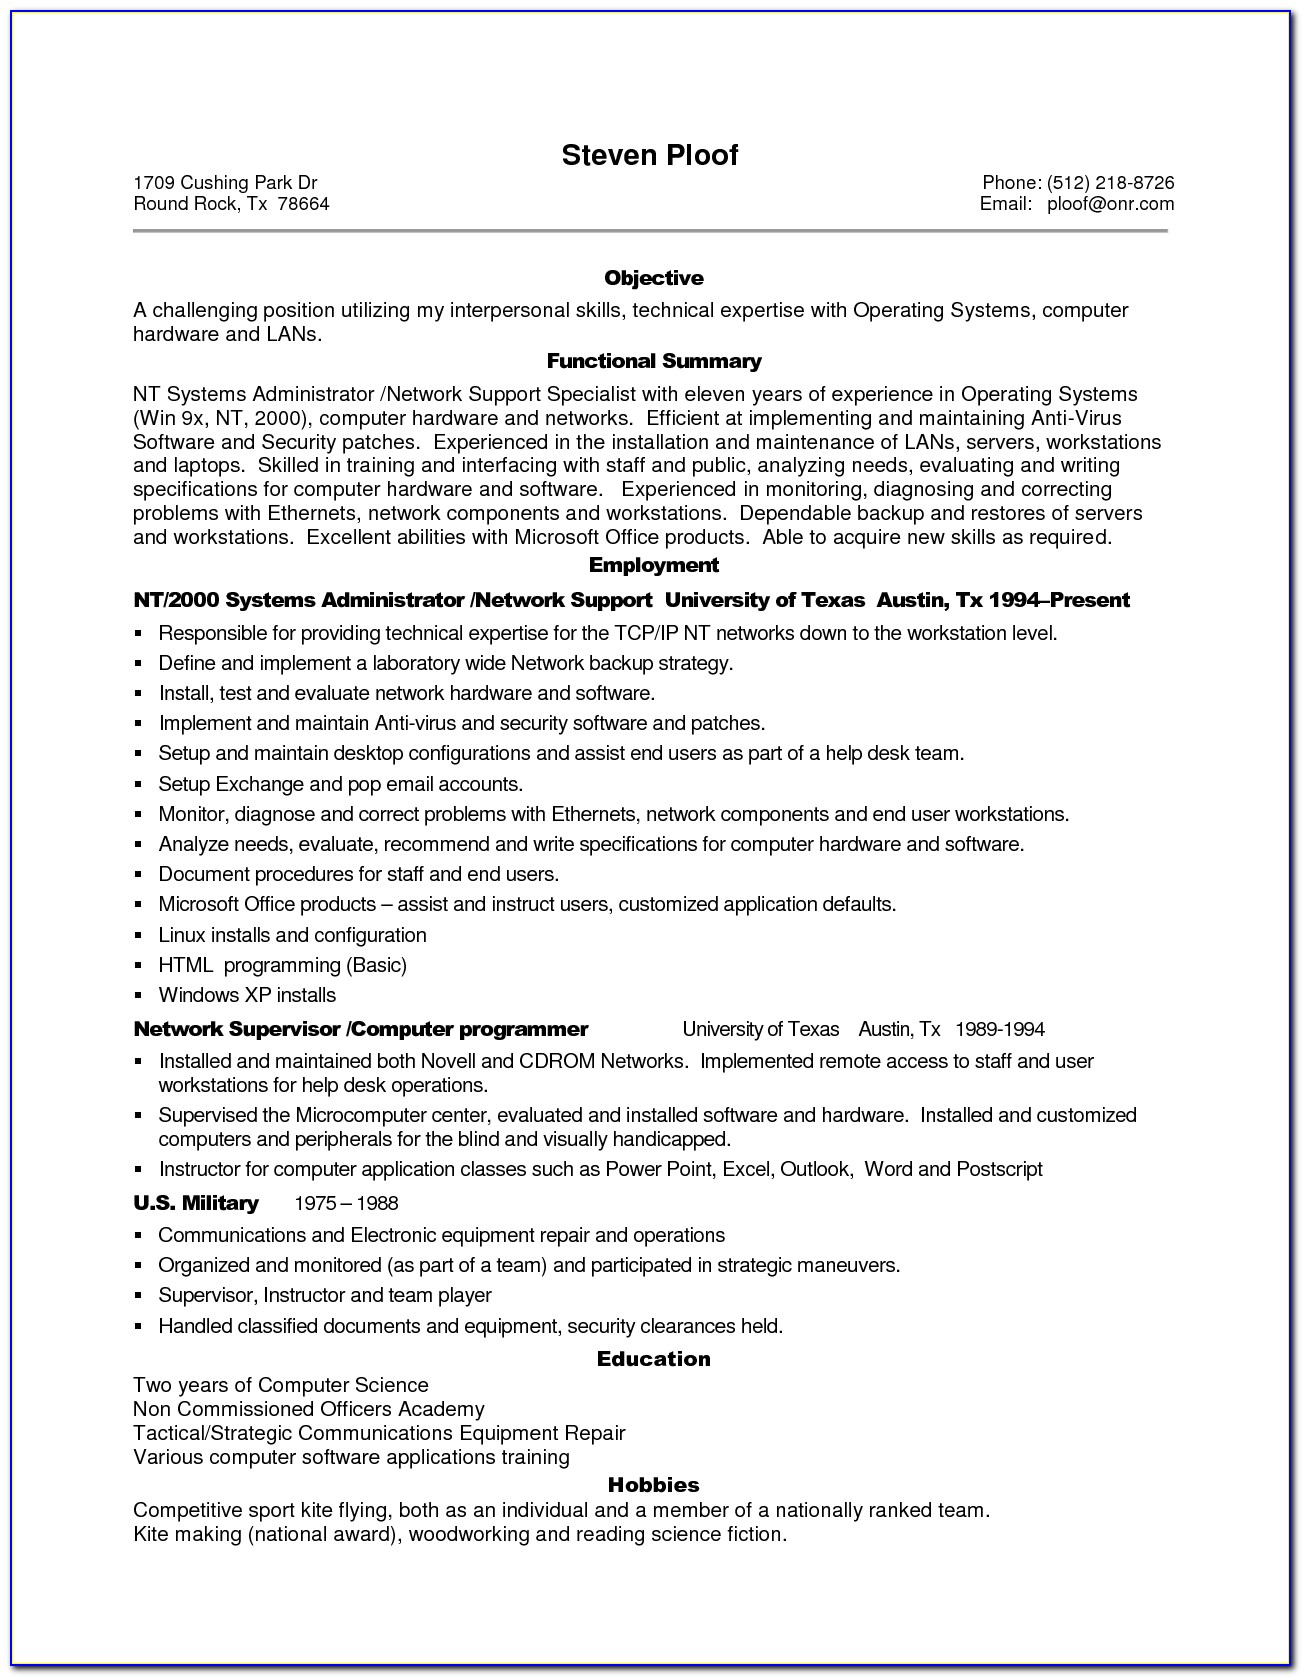 Professional Executive Resume Services